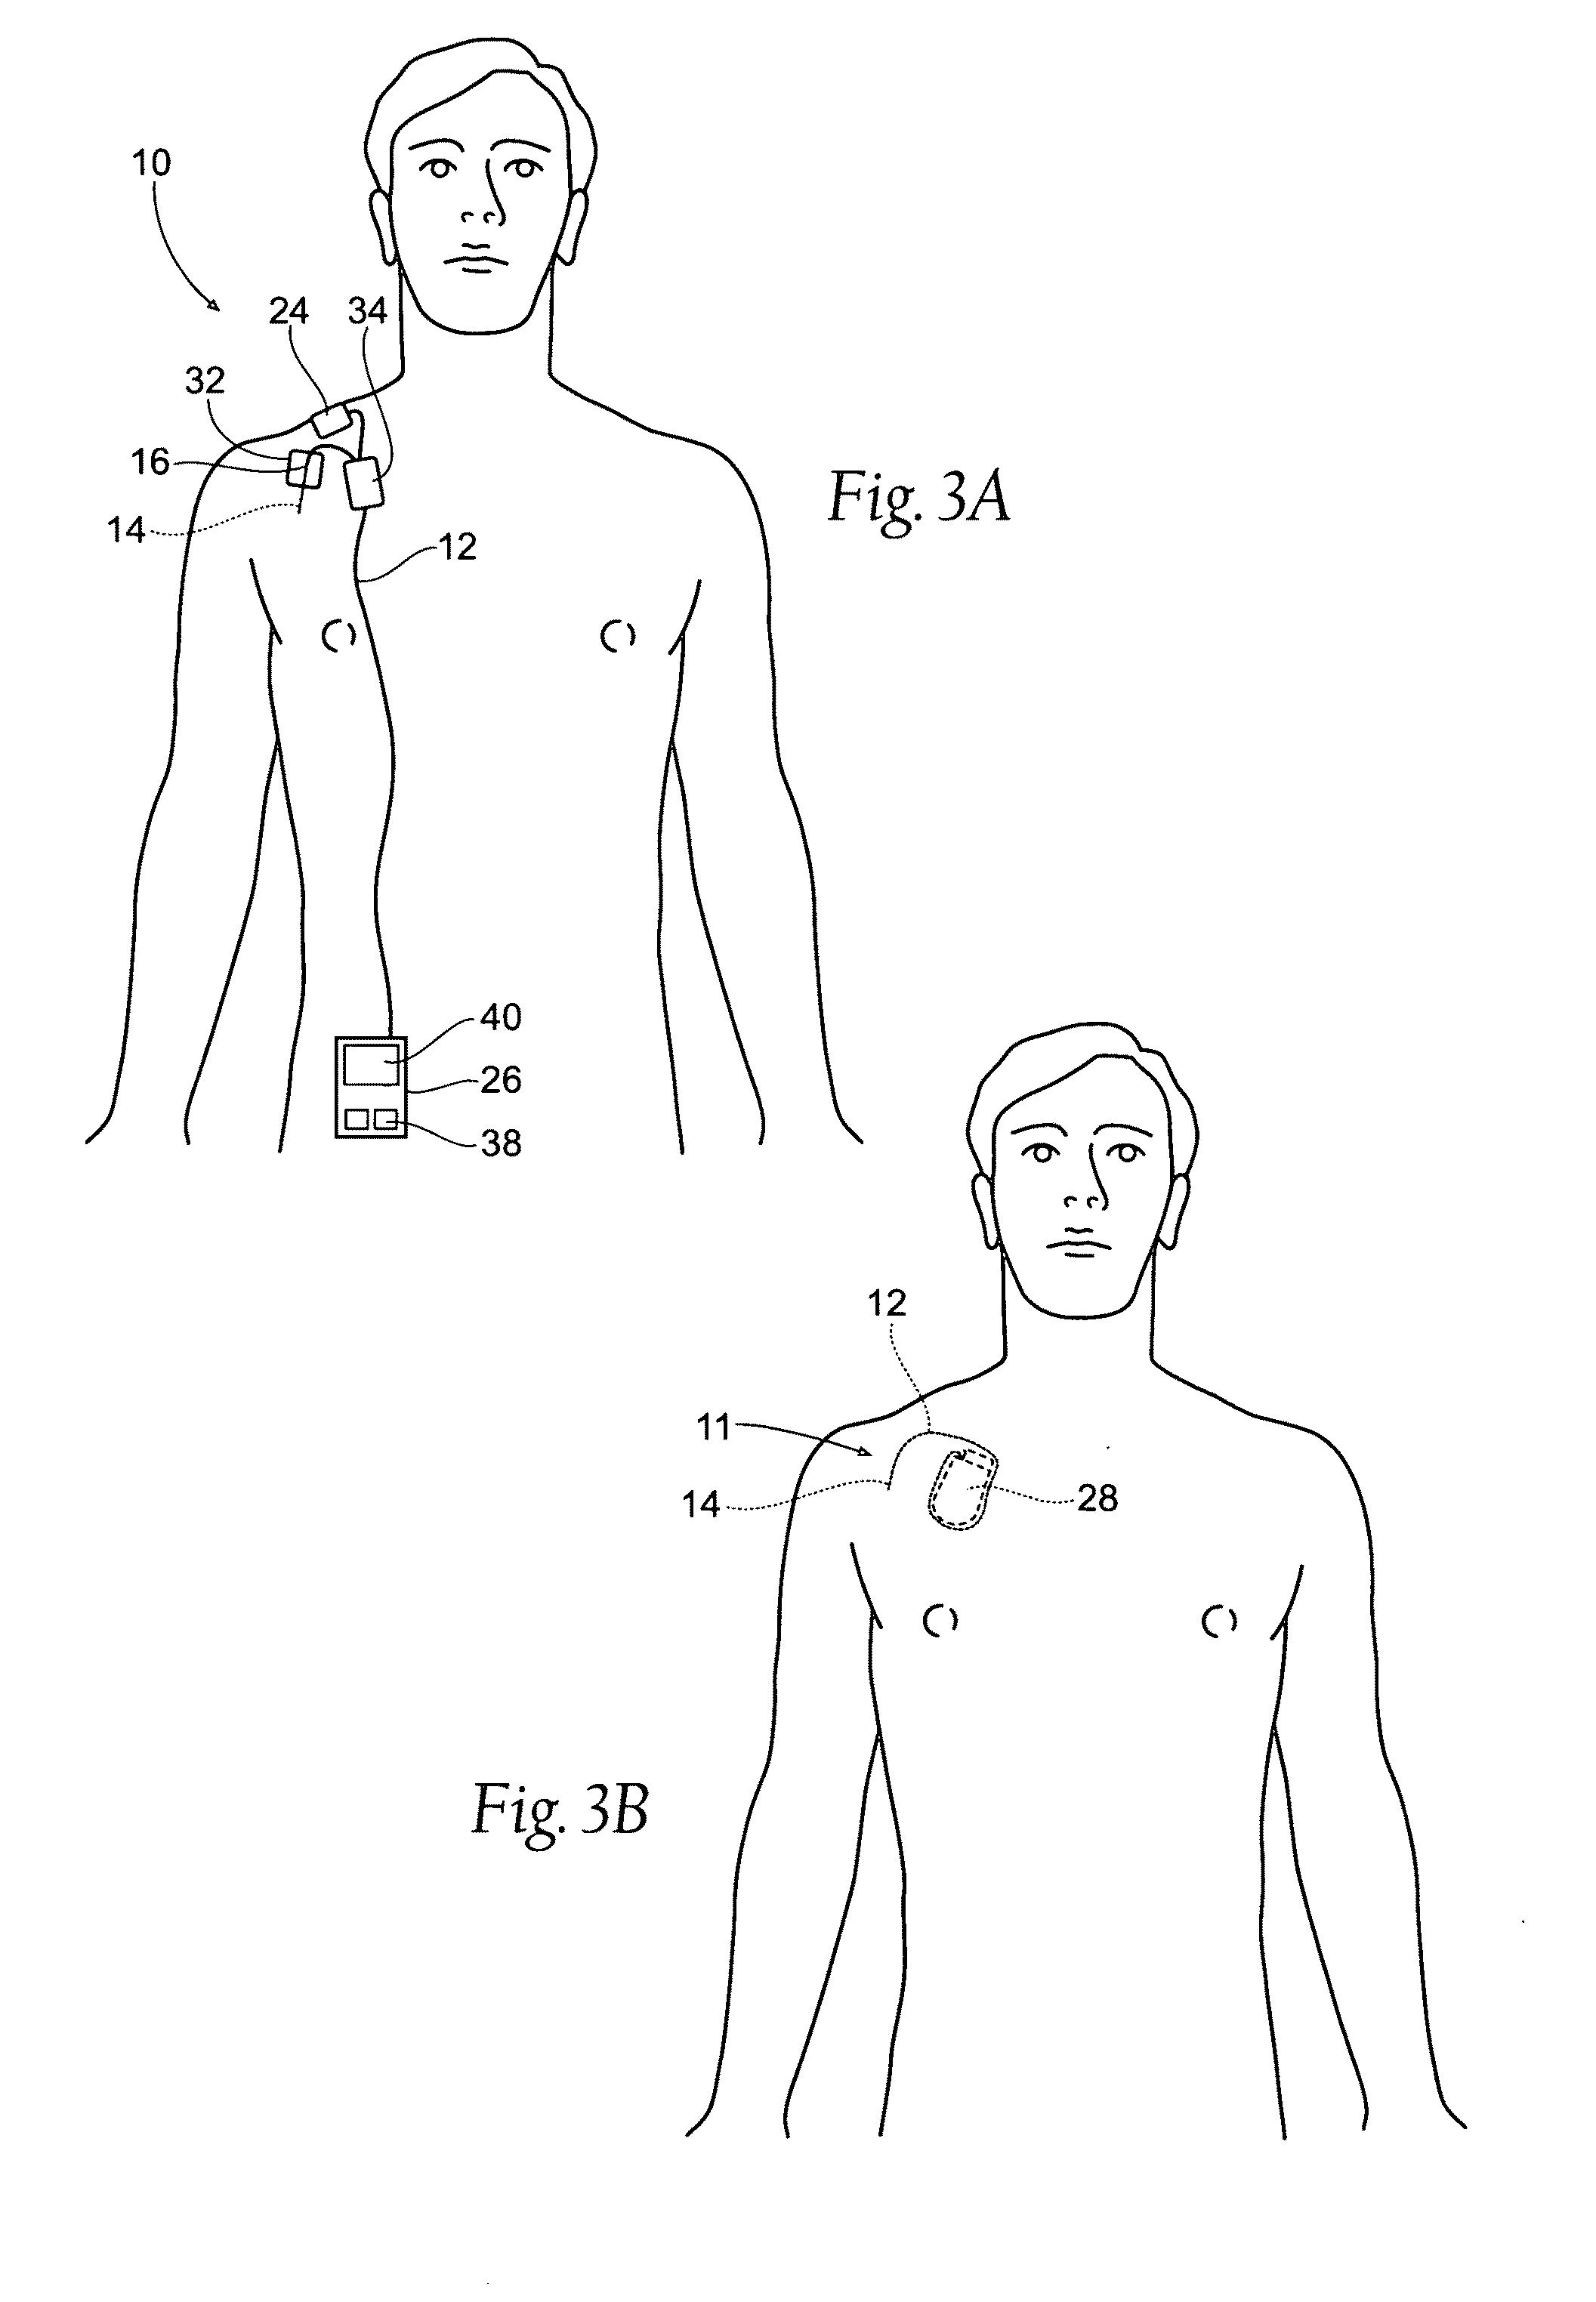 Systems and methods to place one or more leads in muscle for providing electrical stimulation to treat pain